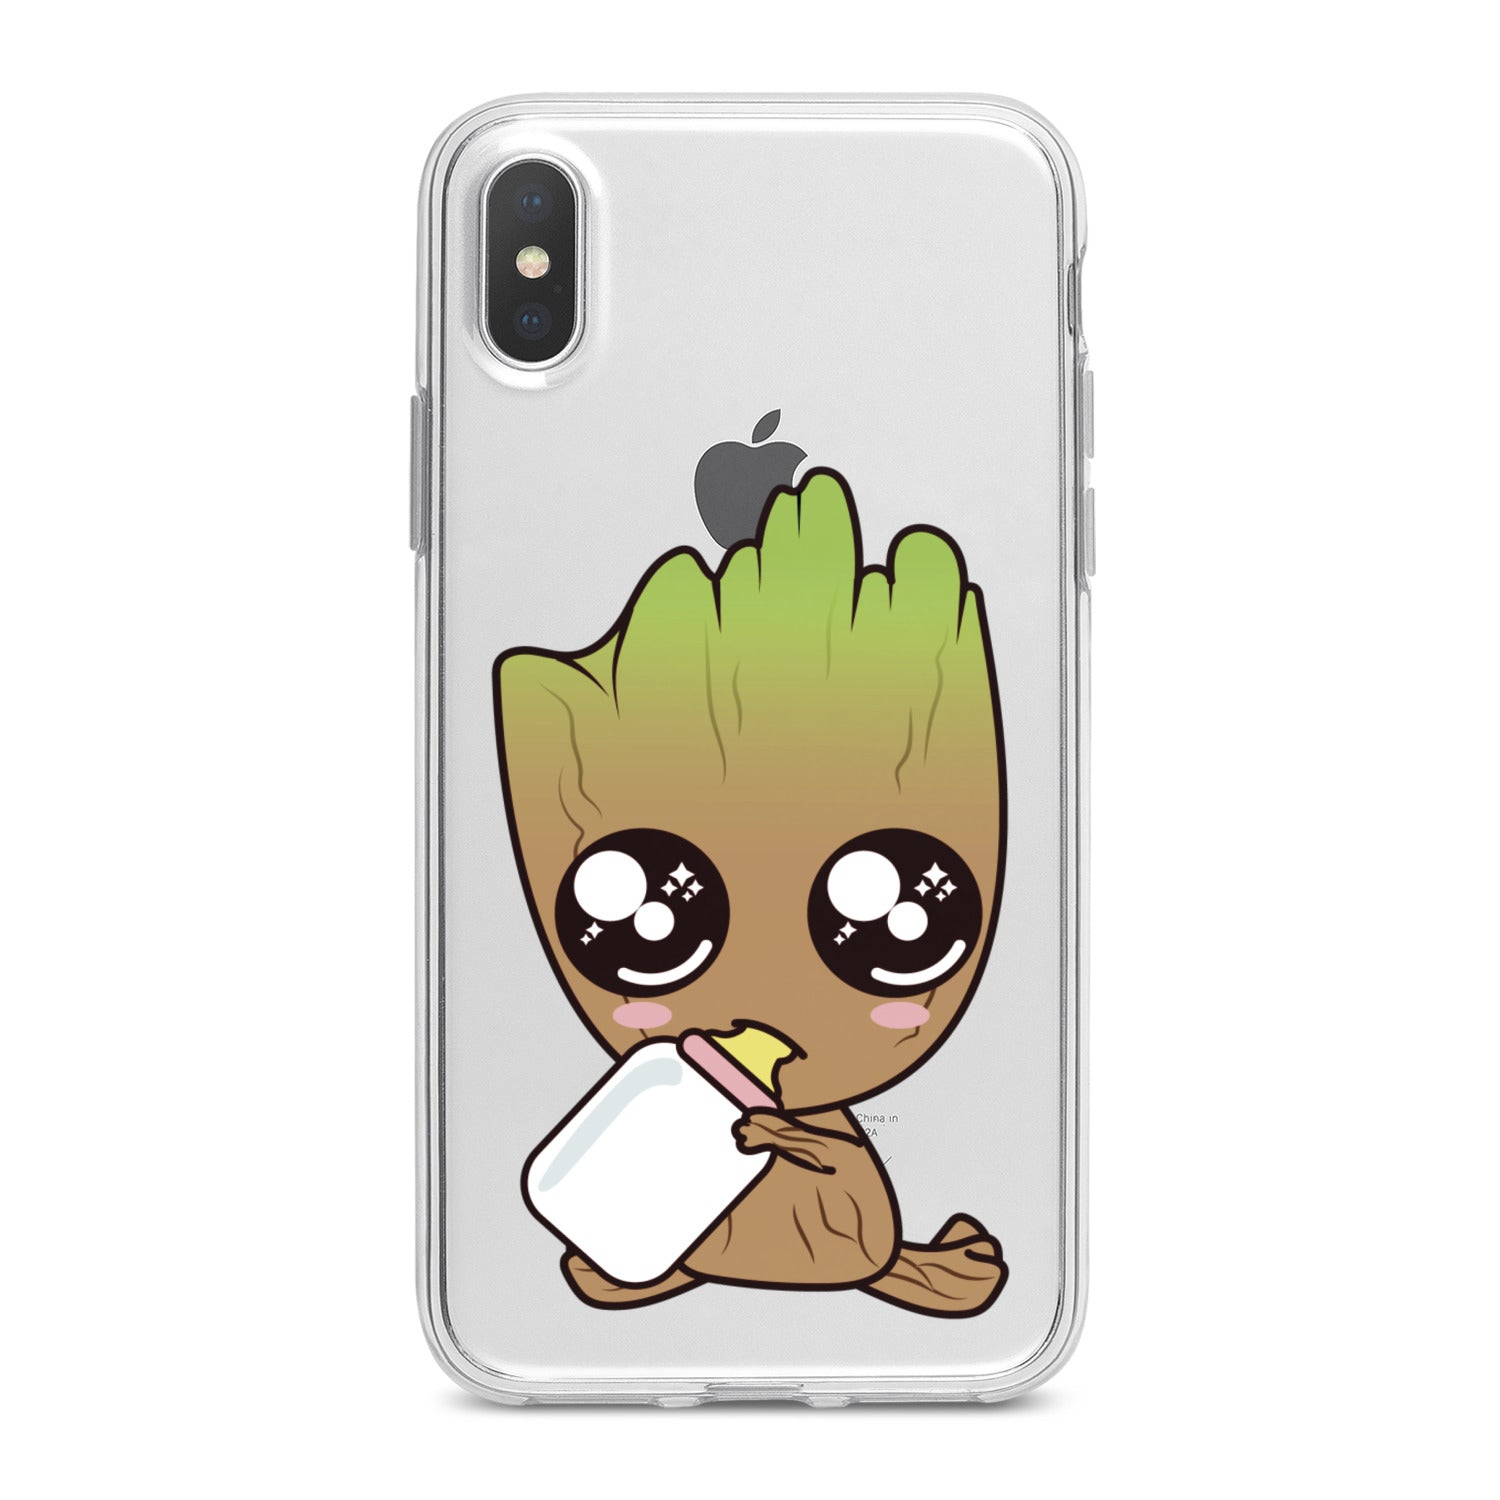 Lex Altern Lovely Baby Groot Phone Case for your iPhone & Android phone.